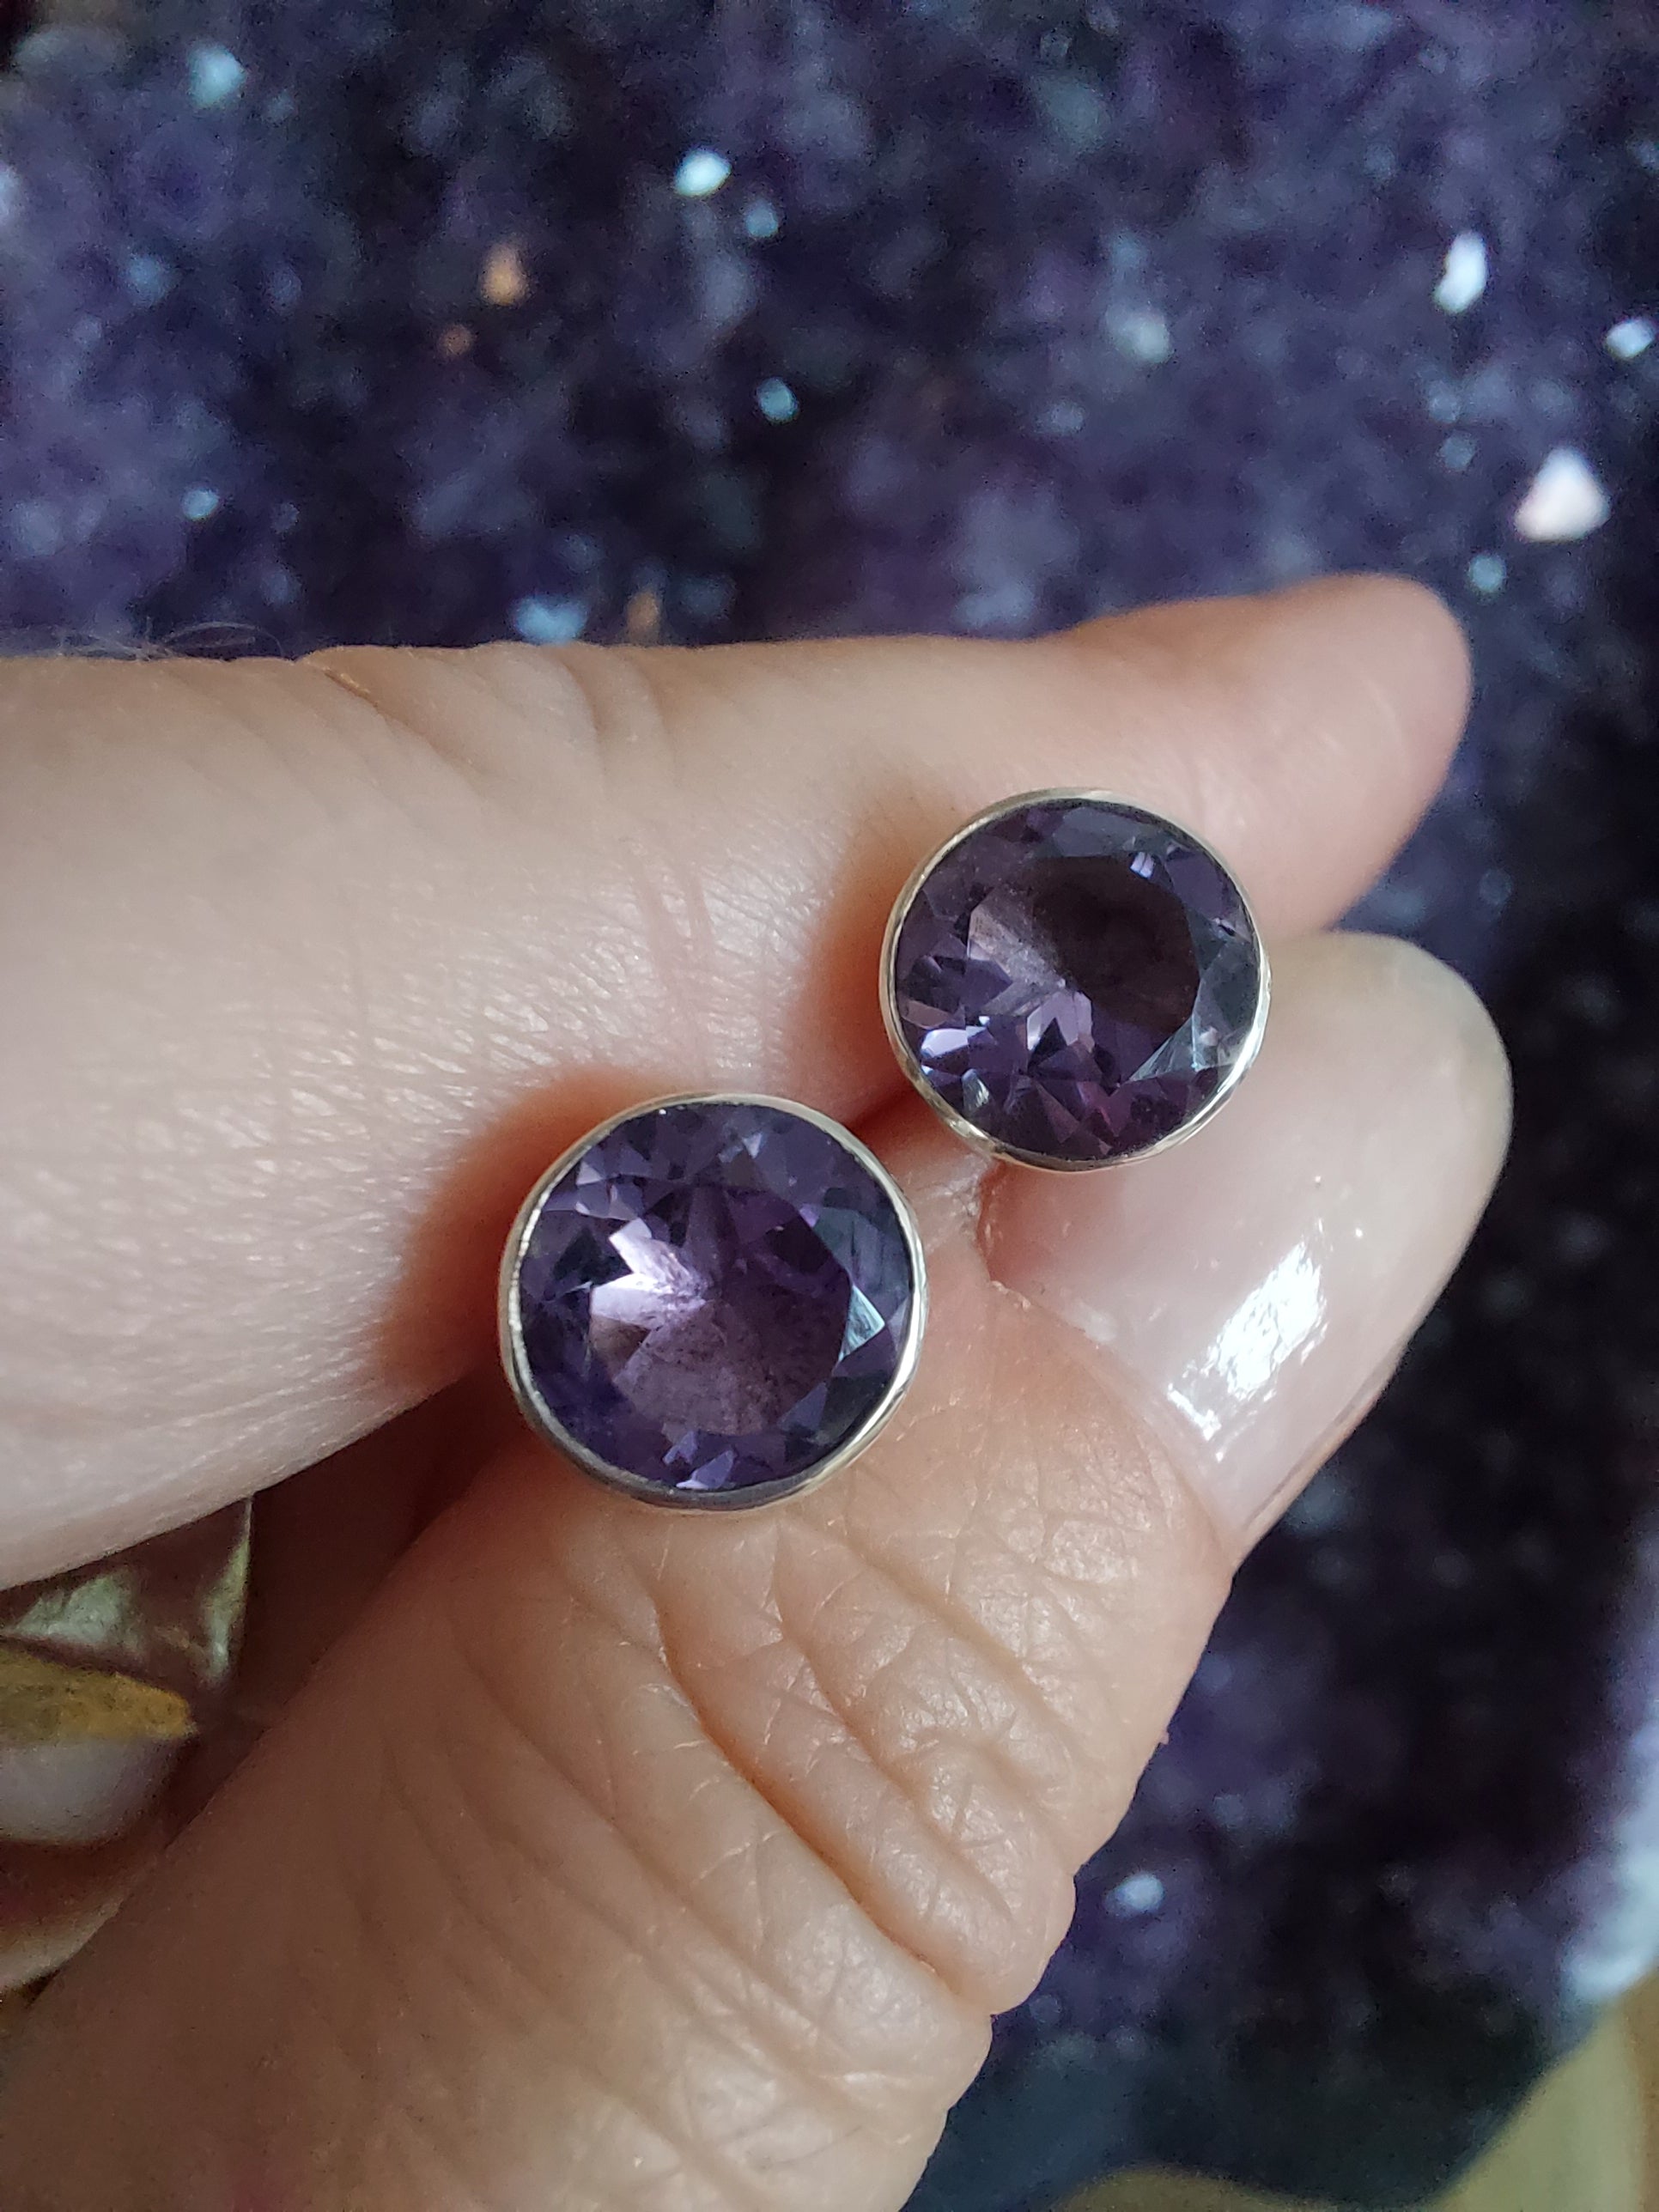 Amethyst Round Faceted Stud Earrings - 0.9cm - 925 Sterling Silver